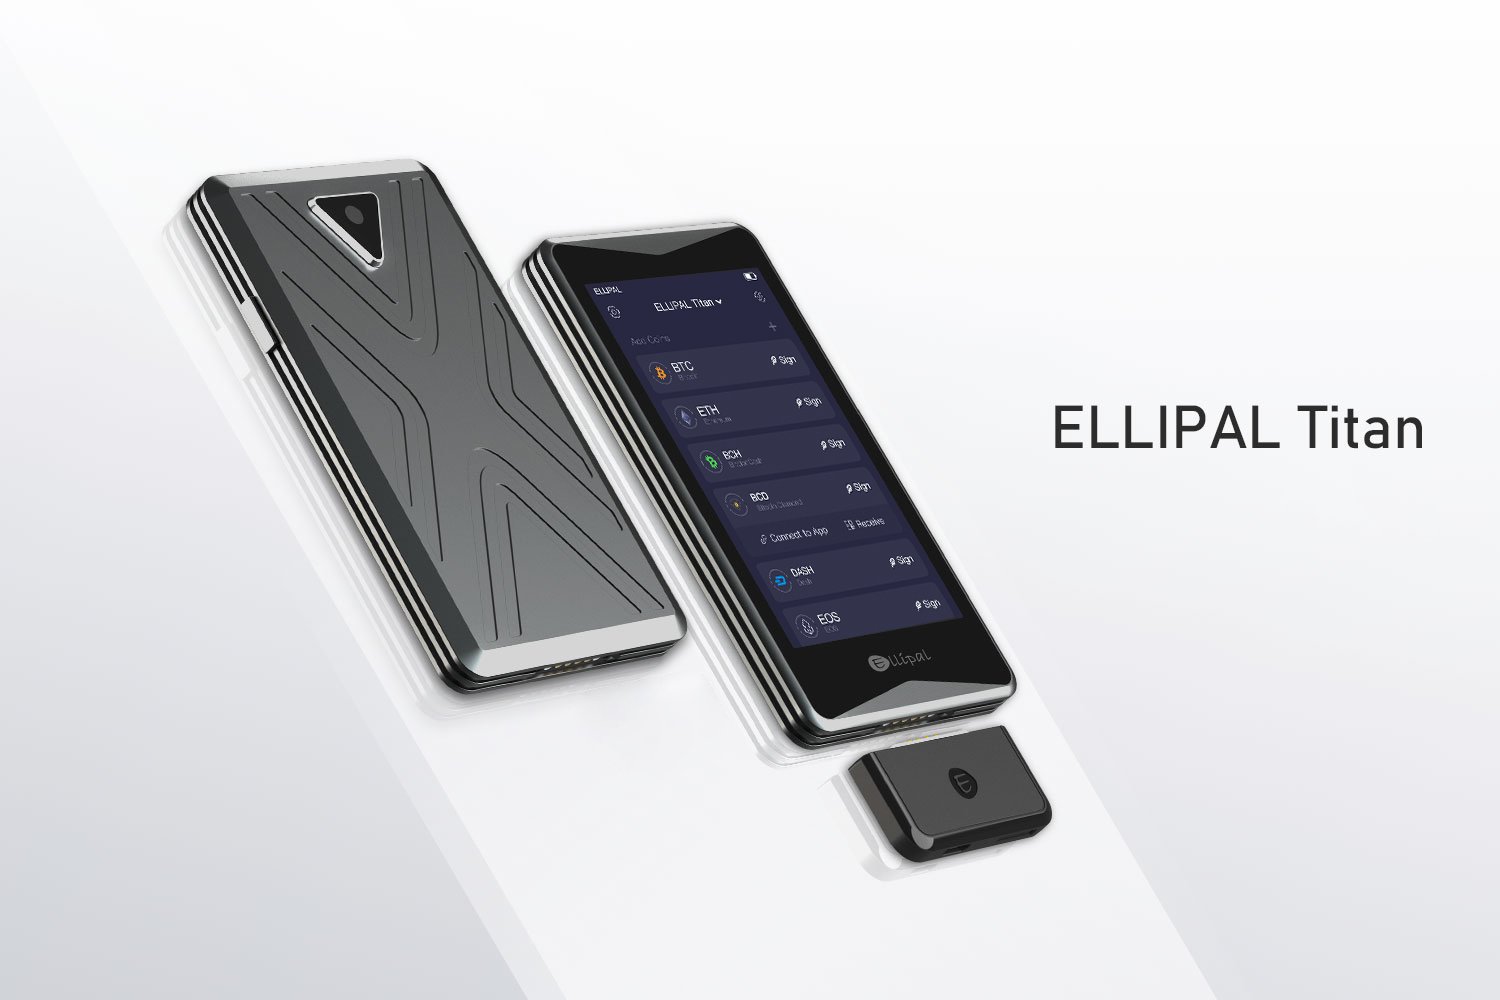 Compare 5 Best Hardware Wallets Security, Connectivity, and Compatibility – ELLIPAL